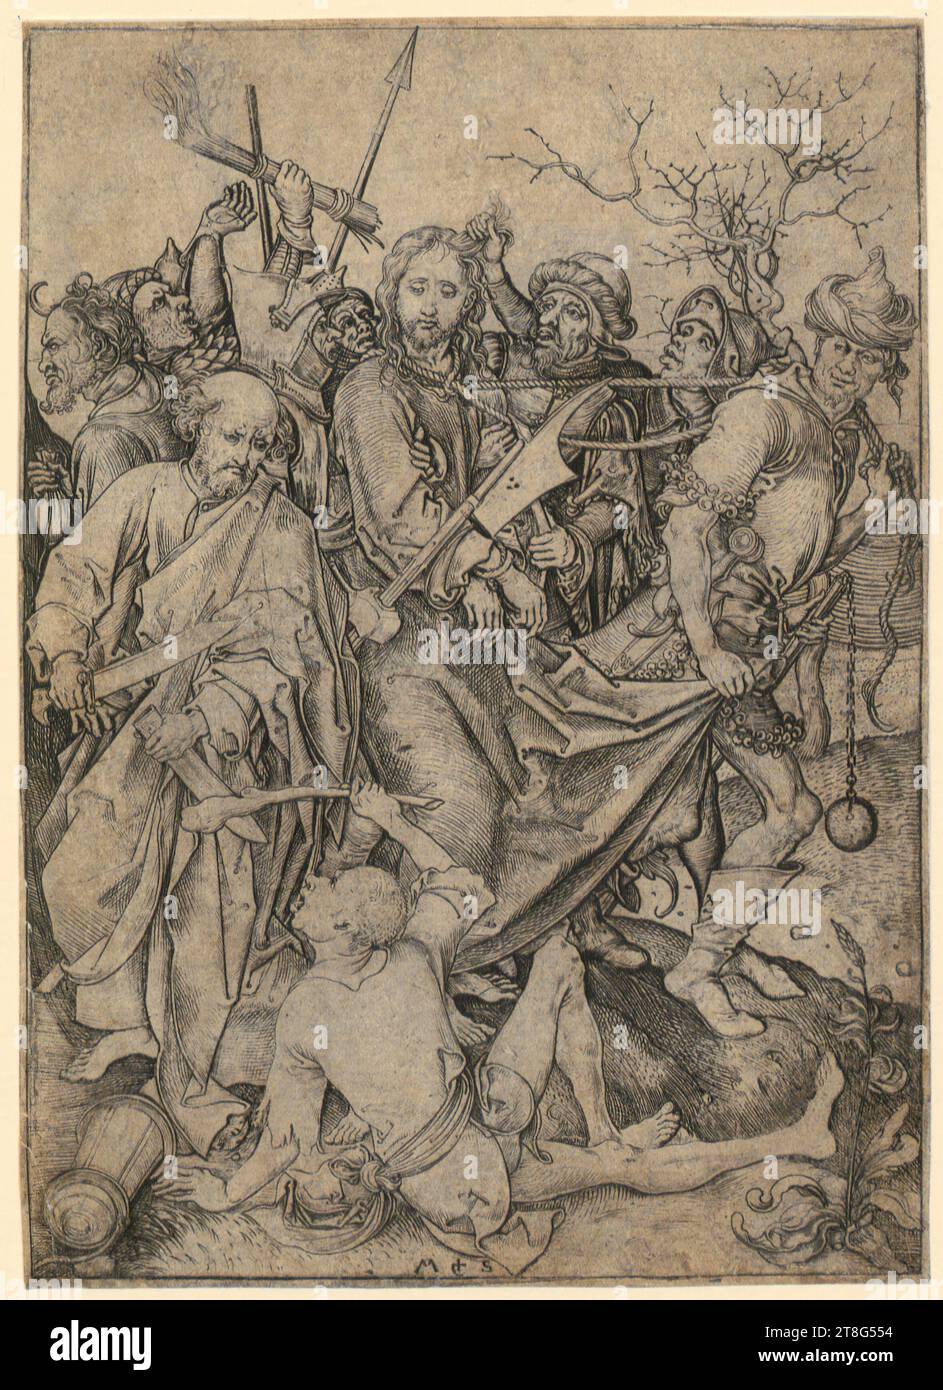 Martin Schongauer (1450 um - 1491), artist, Betrayal and Capture of Christ, sheet 2 of the series 'The Passion of Christ', print medium: 1470 - 1482, copperplate engraving, sheet size: 16.7 x 11.9 cm, bottom center monogrammed 'M + S Stock Photo